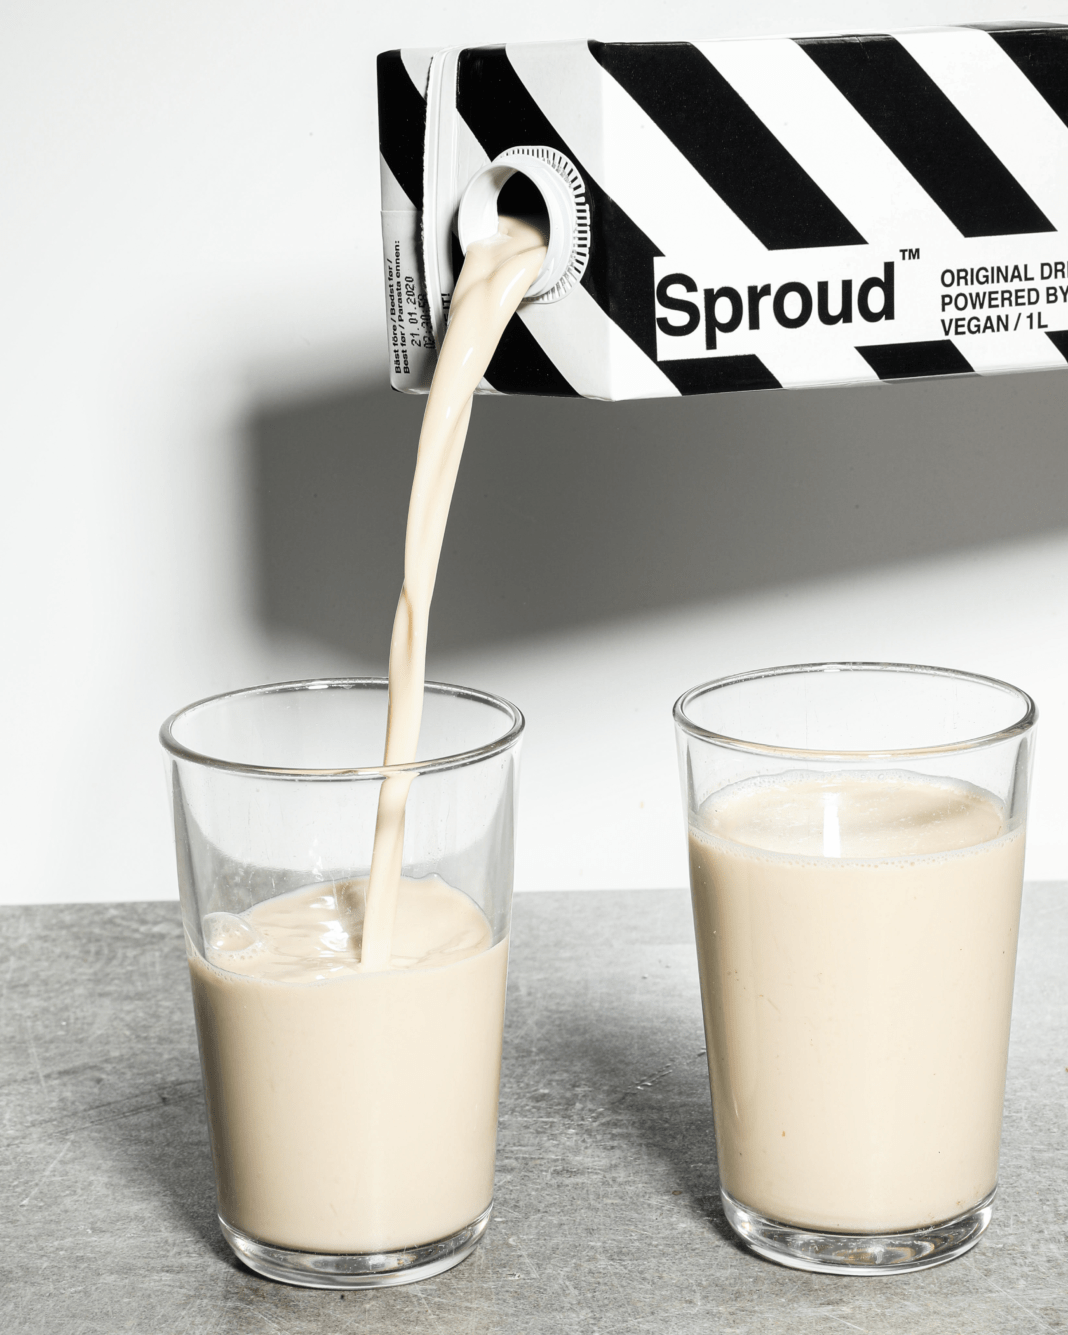 Plant-based Sproud milk being poured into glasses. Photo: Sproud